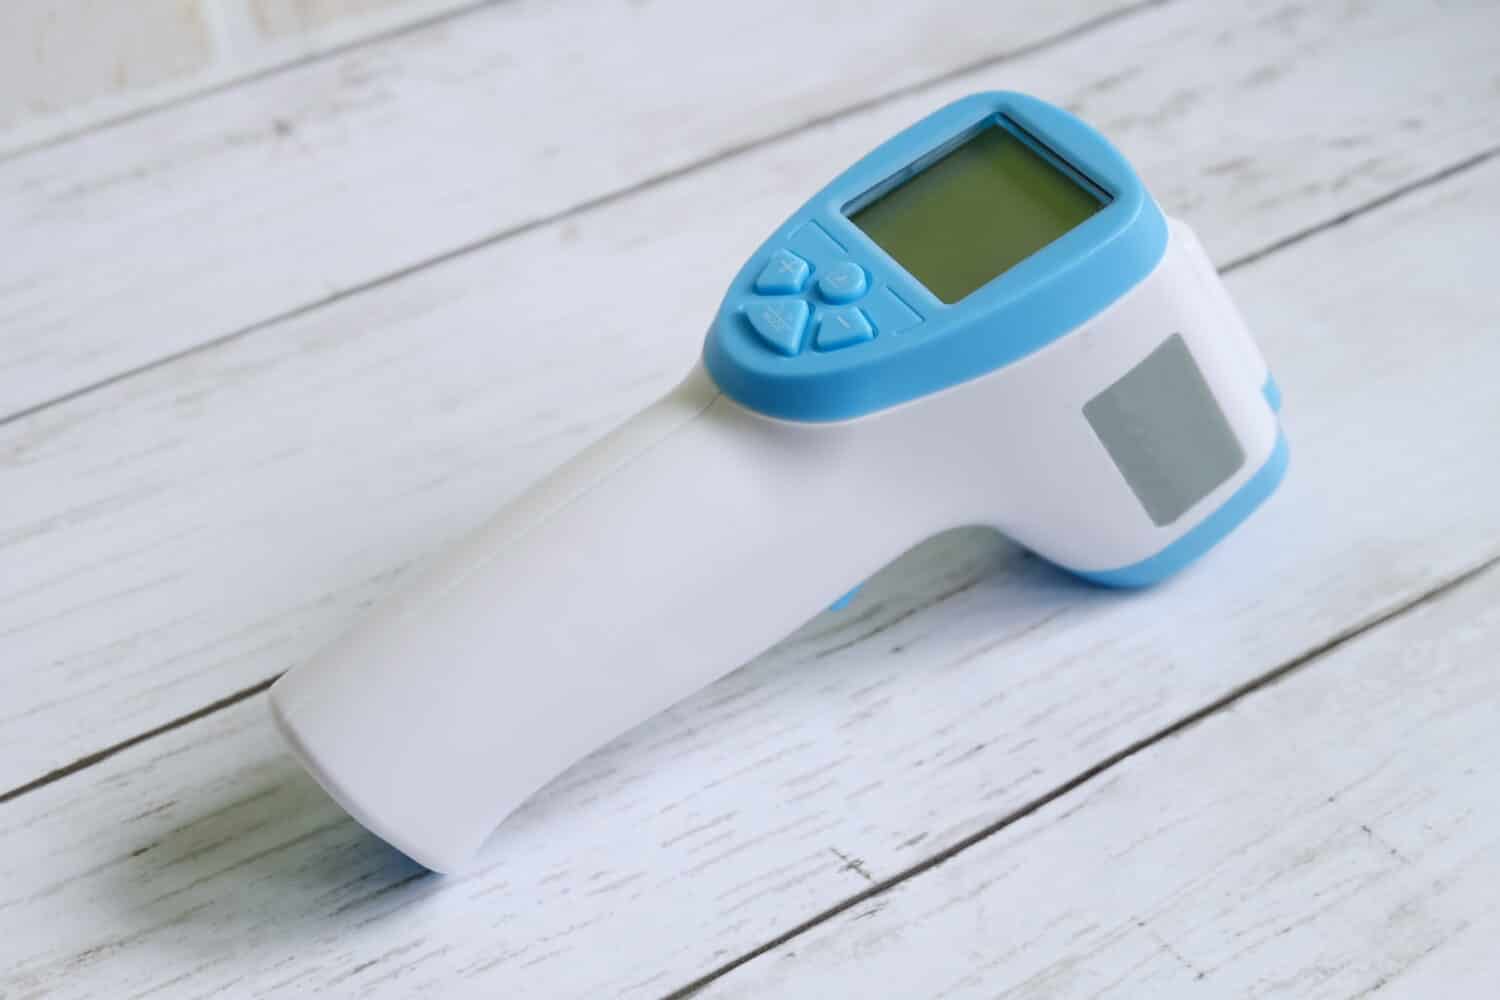 Non-contact infrared thermometer on white wooden background to measure a body temperature. Healthcare and medical theme.